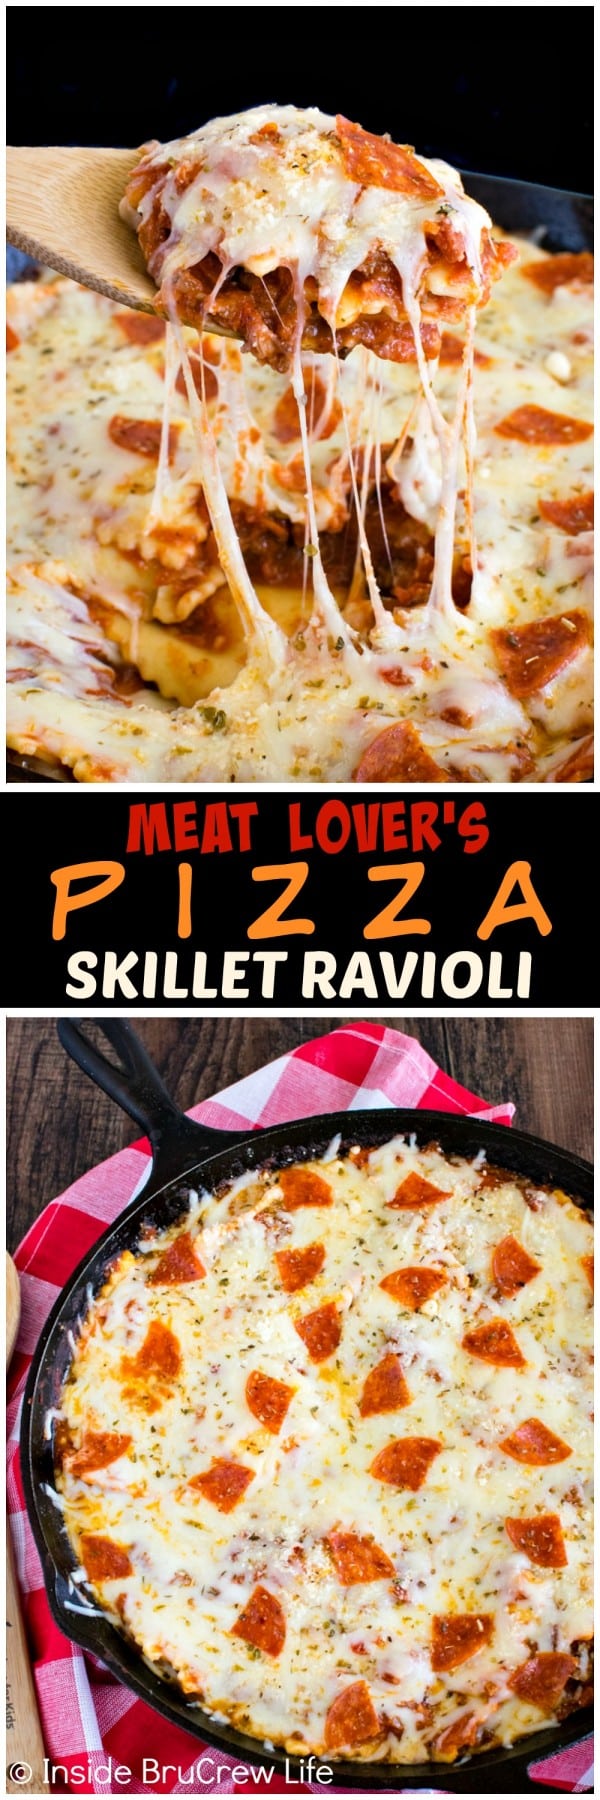 Meat Lover's Pizza Skillet Ravioli - melted cheese & three kinds of meat make this pasta dish a hit at the dinner table. Great recipe for busy nights!